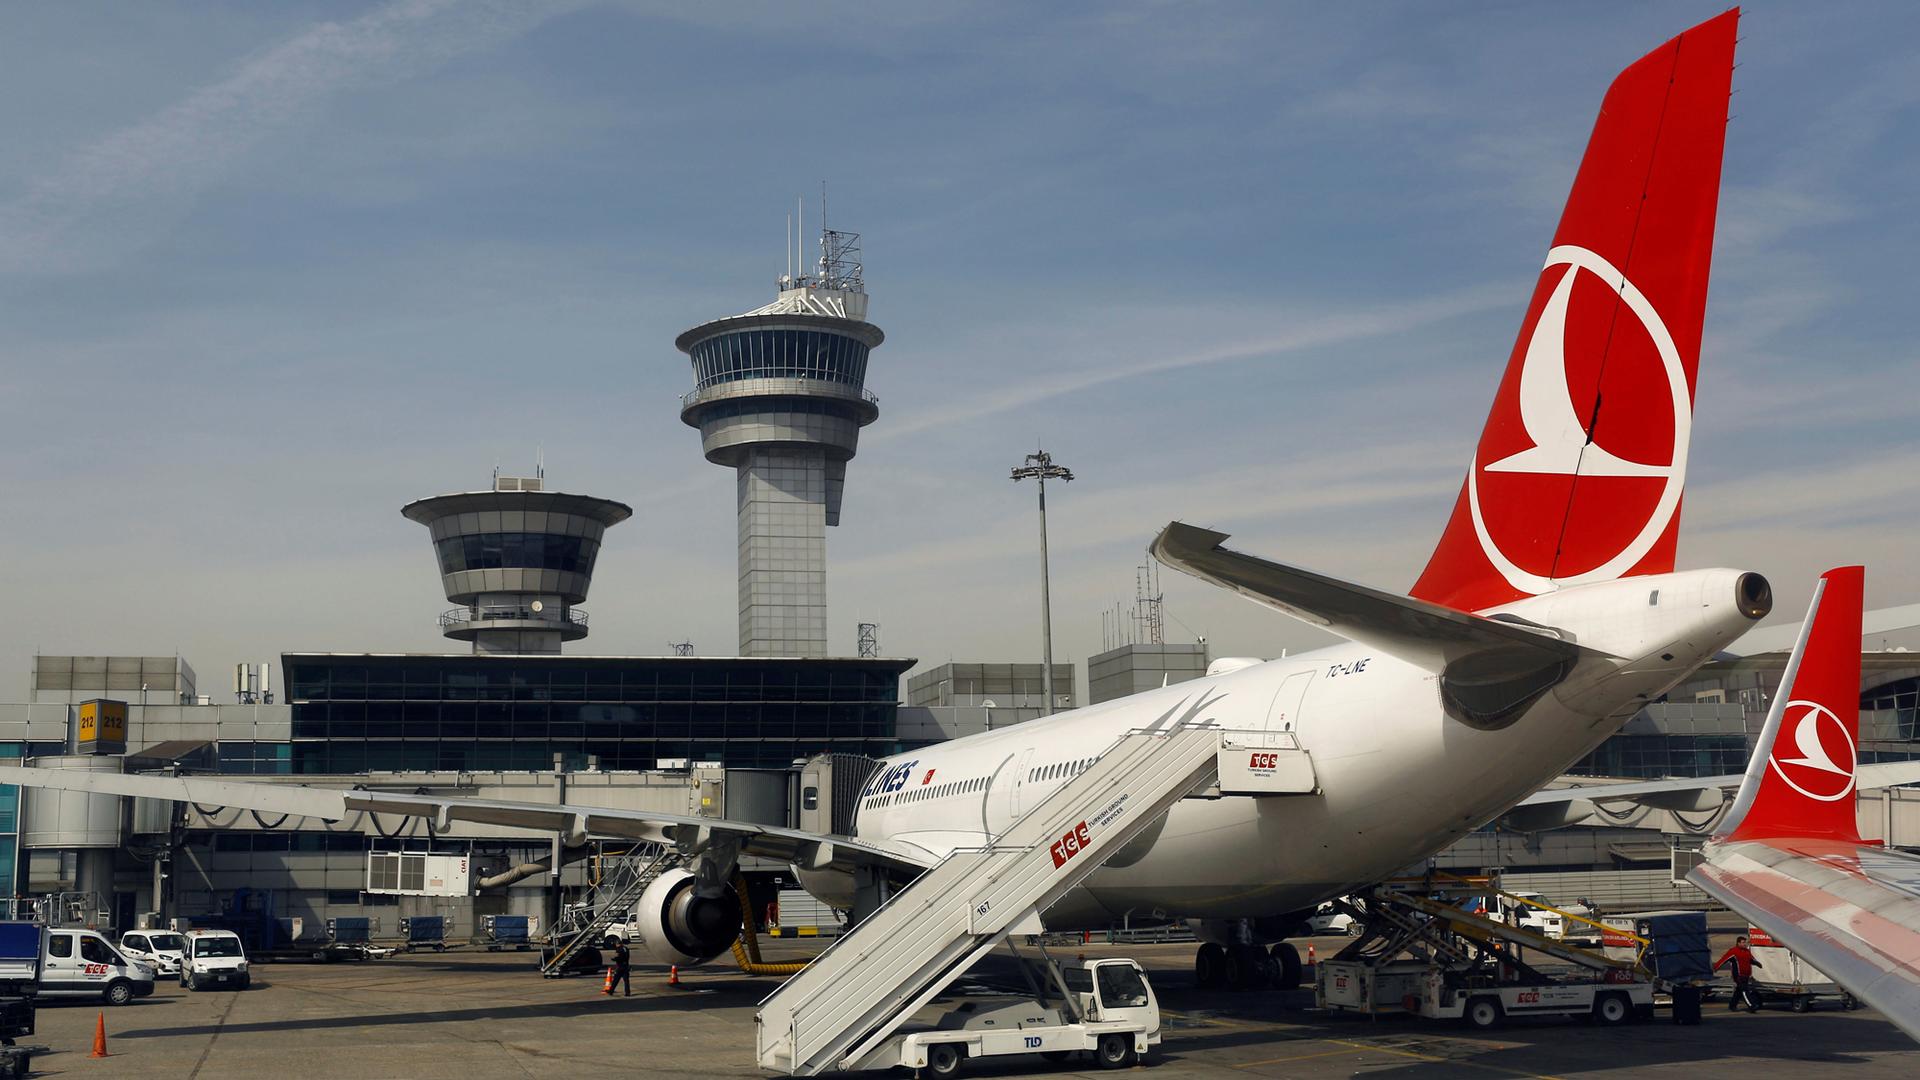 A Turkish Airlines aircraft is parked at Ataturk International airport in Istanbul, Turkey.